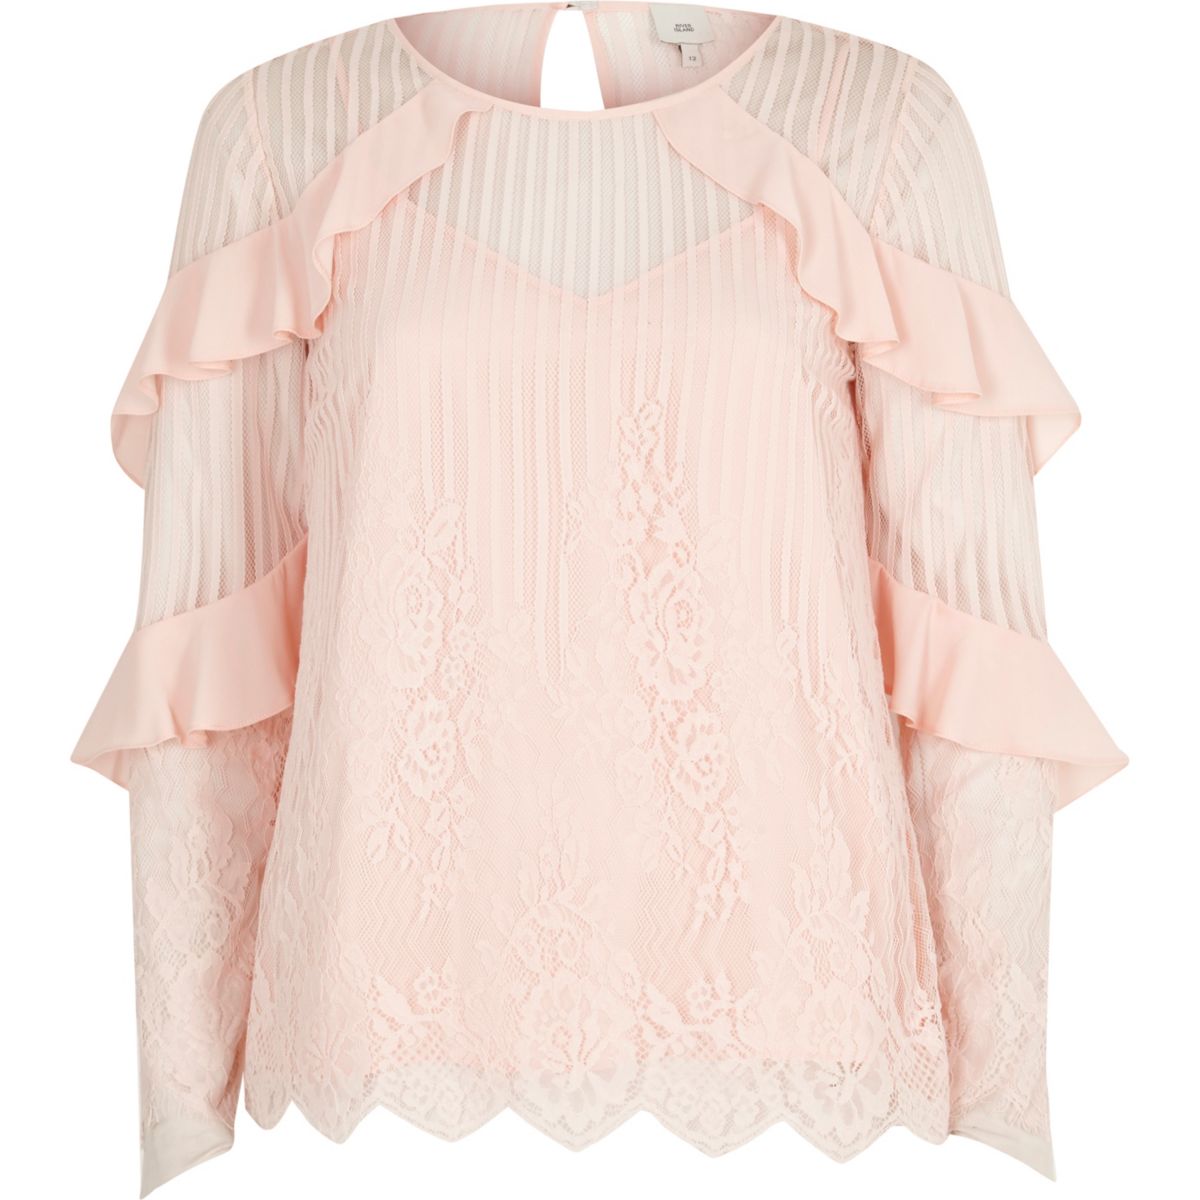 Light pink lace mesh long sleeve top - Blouses - Tops - women